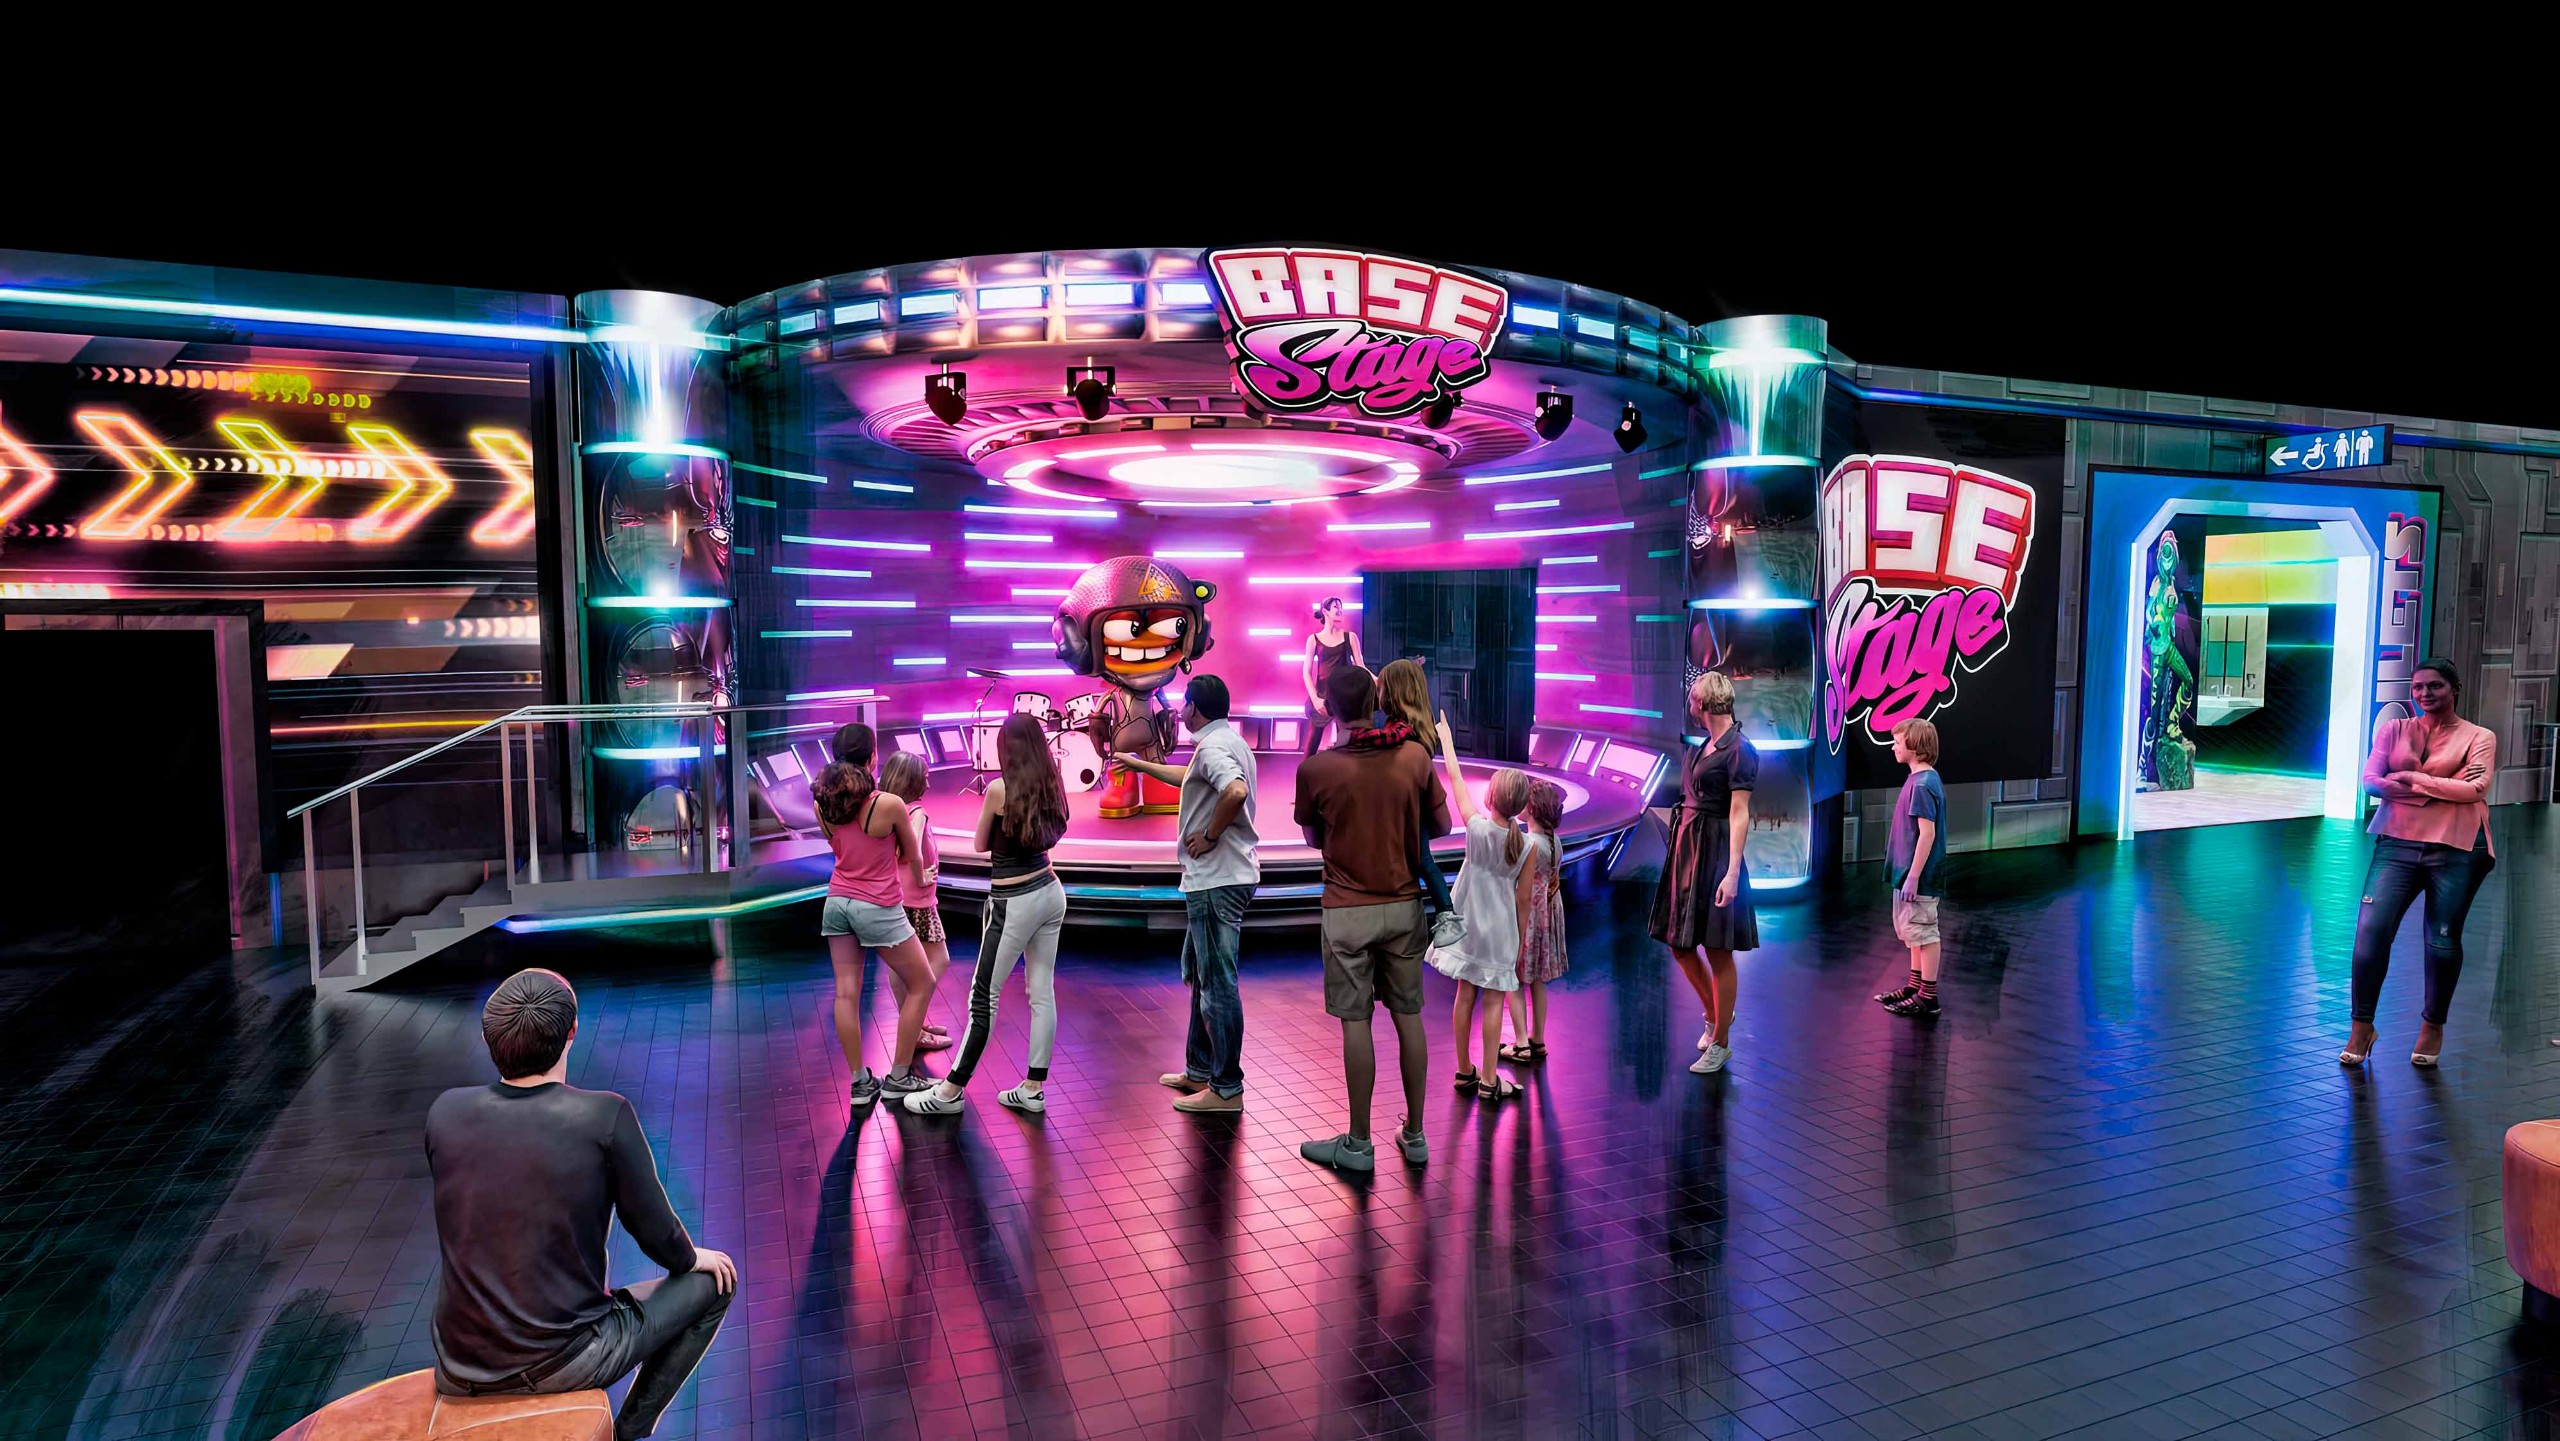 INDOOR THEME PARK MUSICAL STAGE DESIGN AND CONSTRUCTION